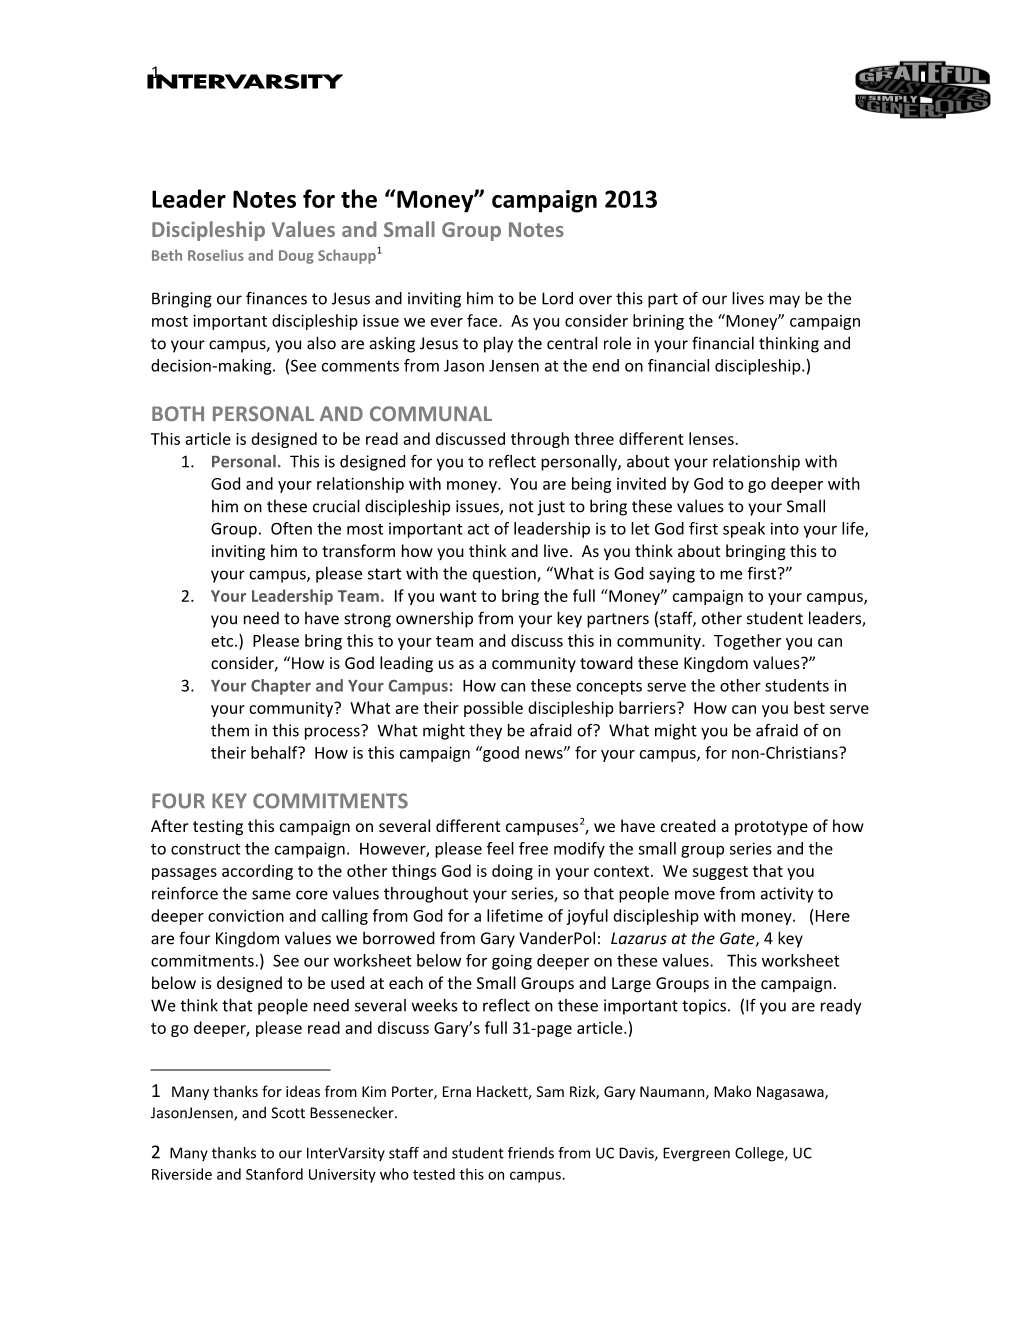 Leader Notes for the Money Campaign 2013